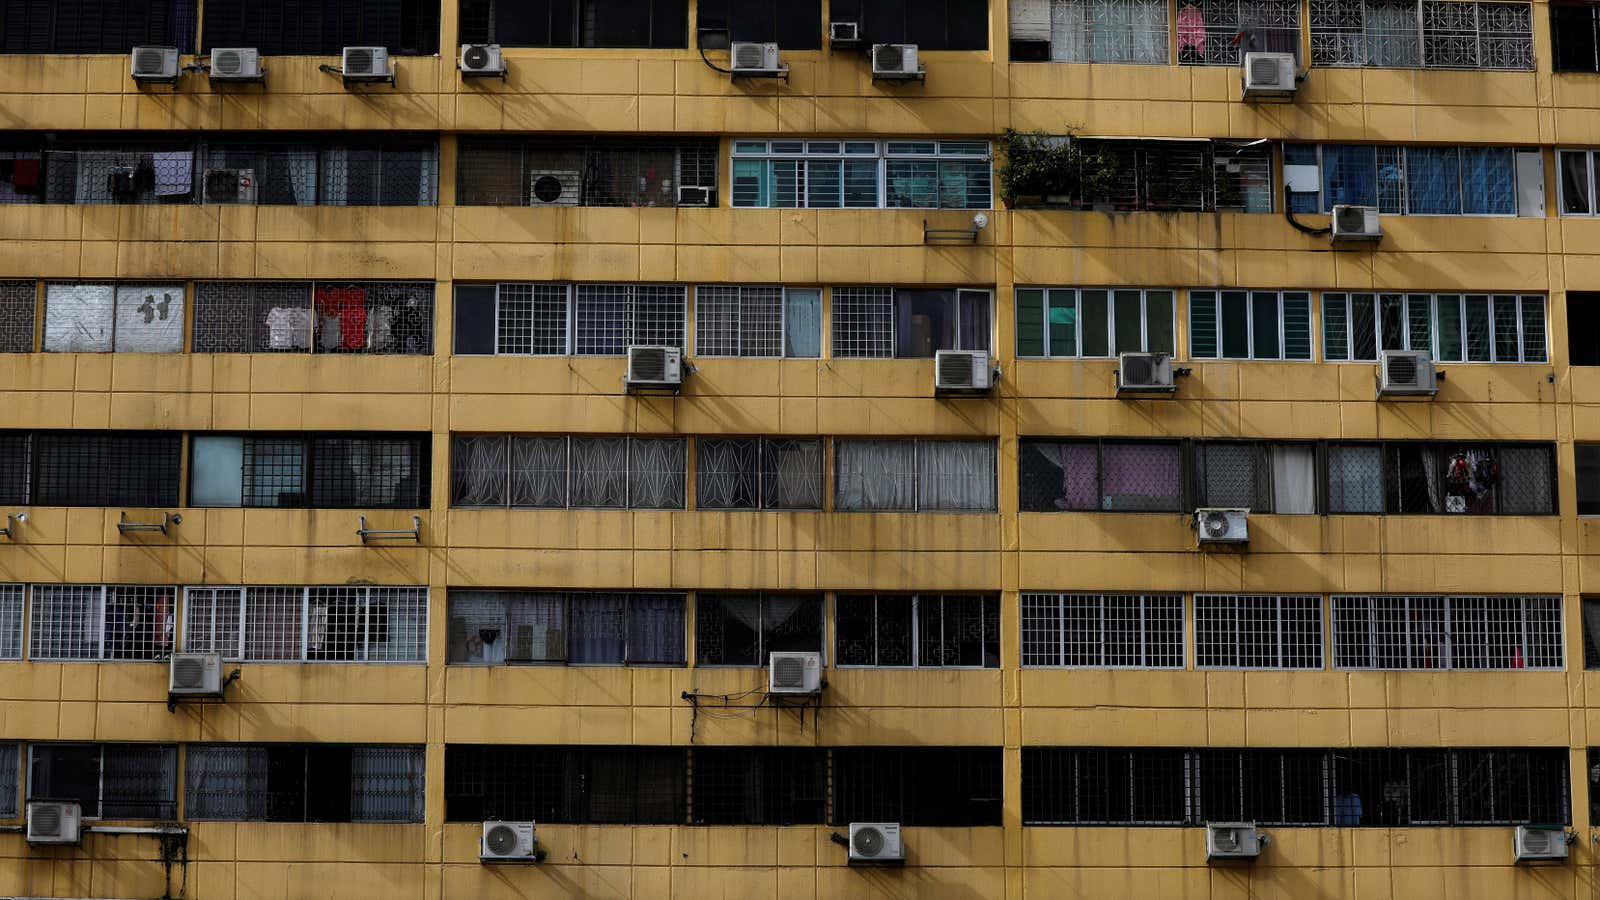 Air-conditioning units dot the facade of People’s Park Complex condominium in Singapore, January 5, 2021.